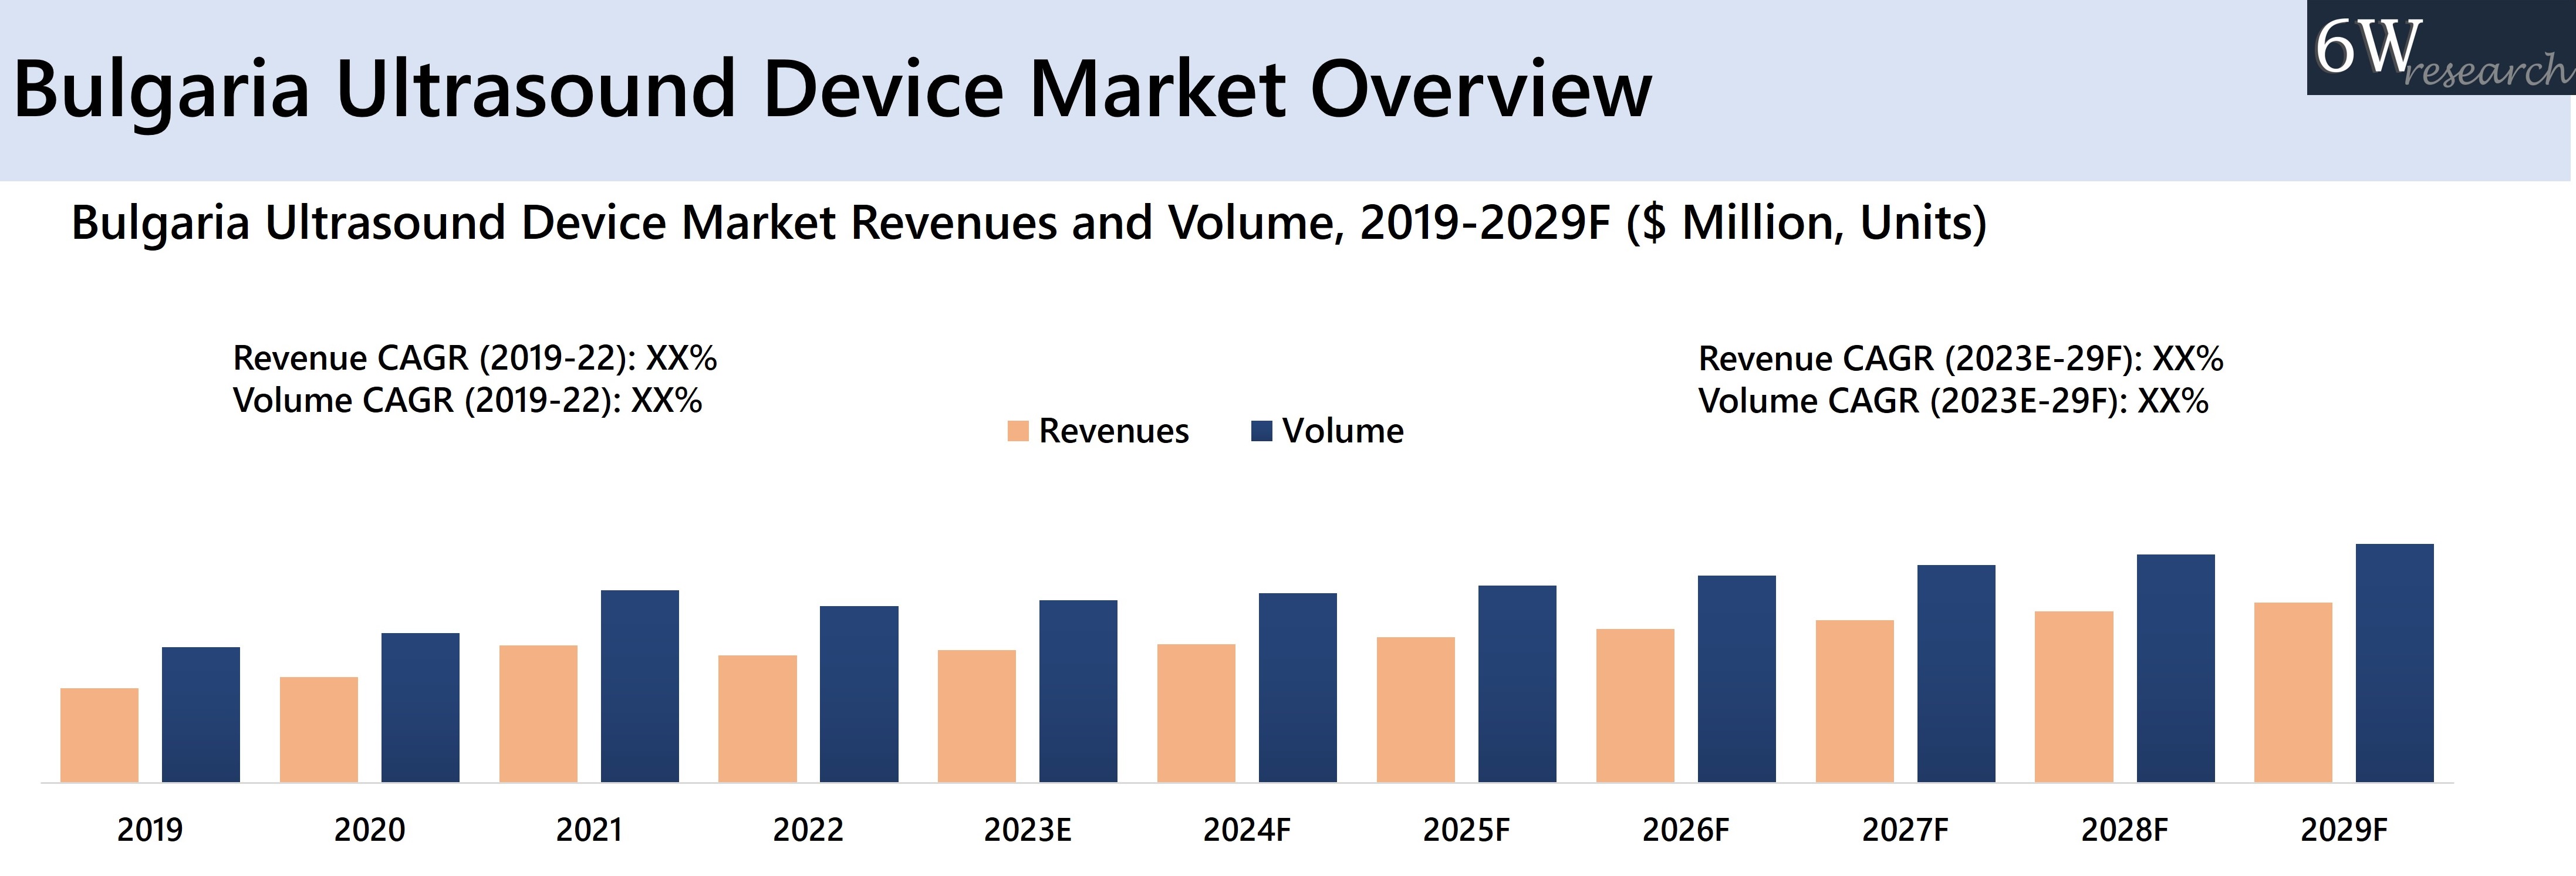 Bulgaria Ultrasound Device Market Overview